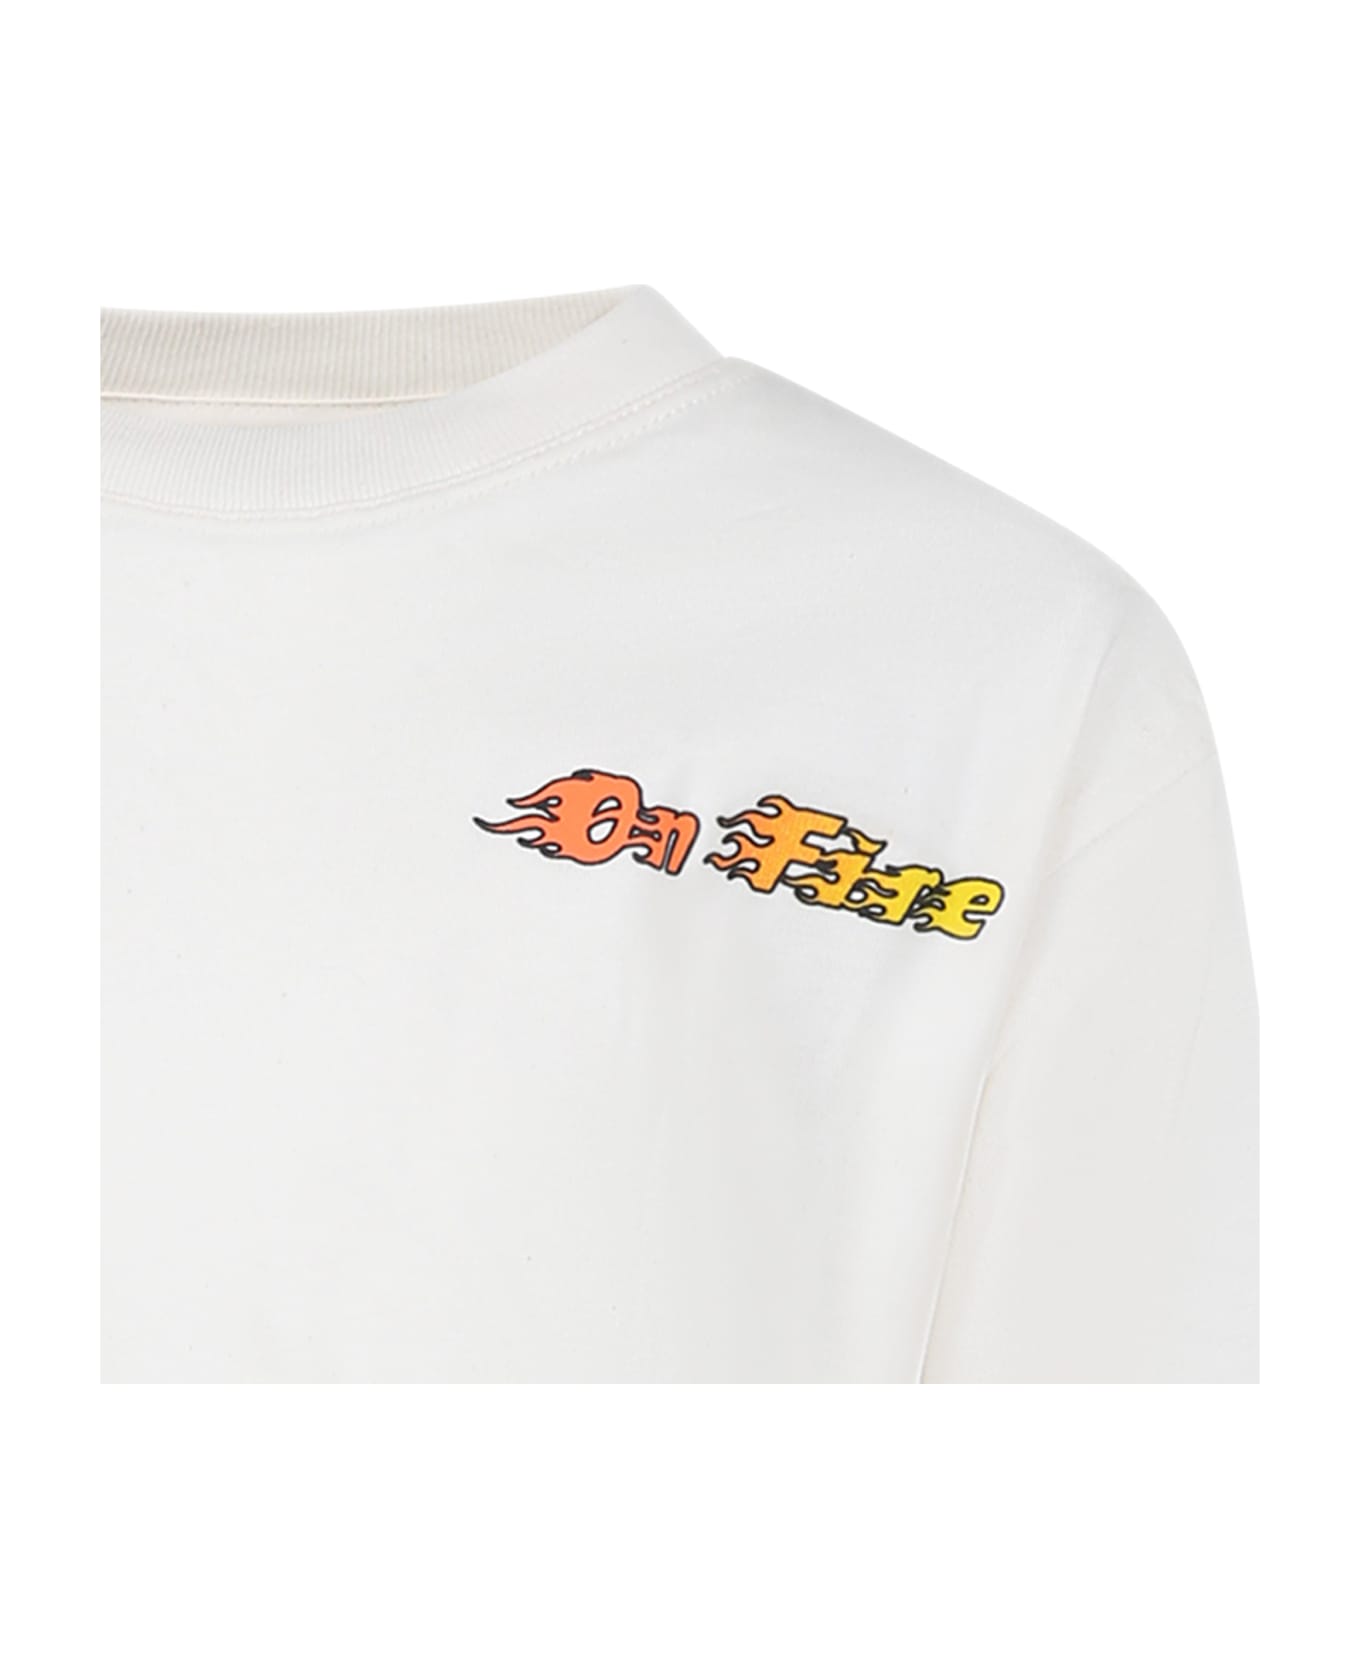 Molo Ivory T-shirt For Boy With Flames - White